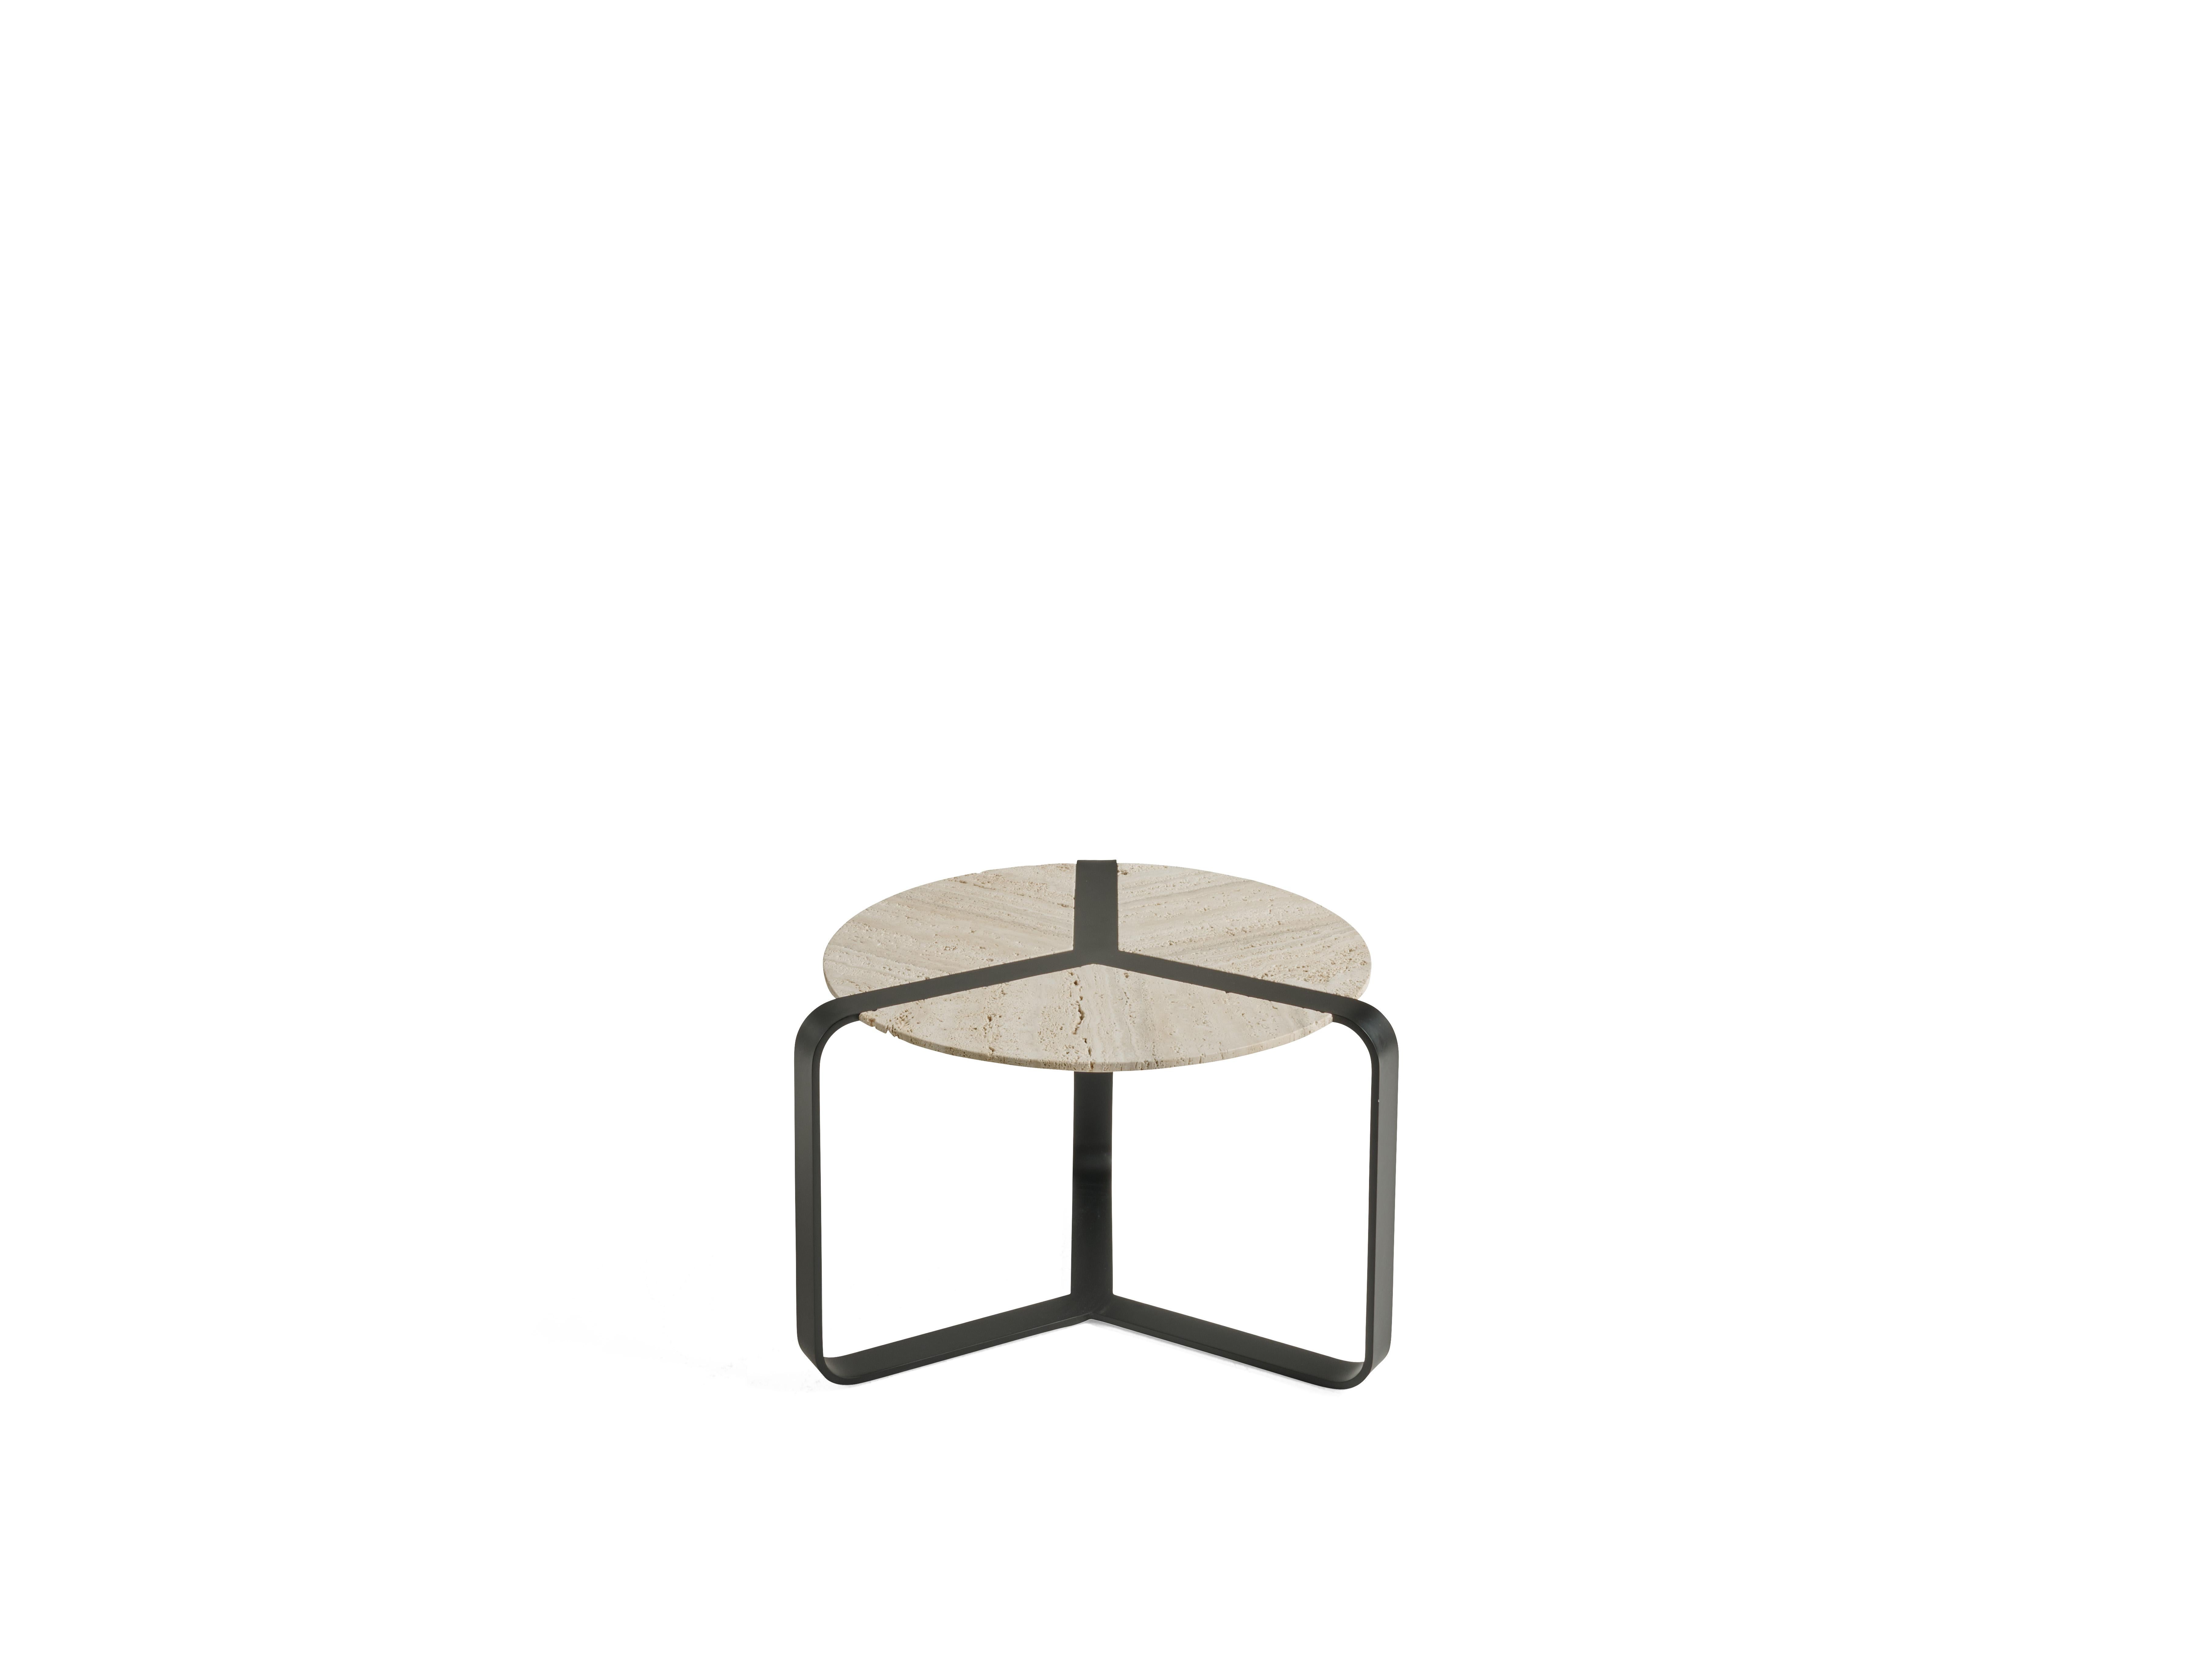 Brooklyn low table with structure in metal with Black (matt) finishing. Top in Travertino marble.